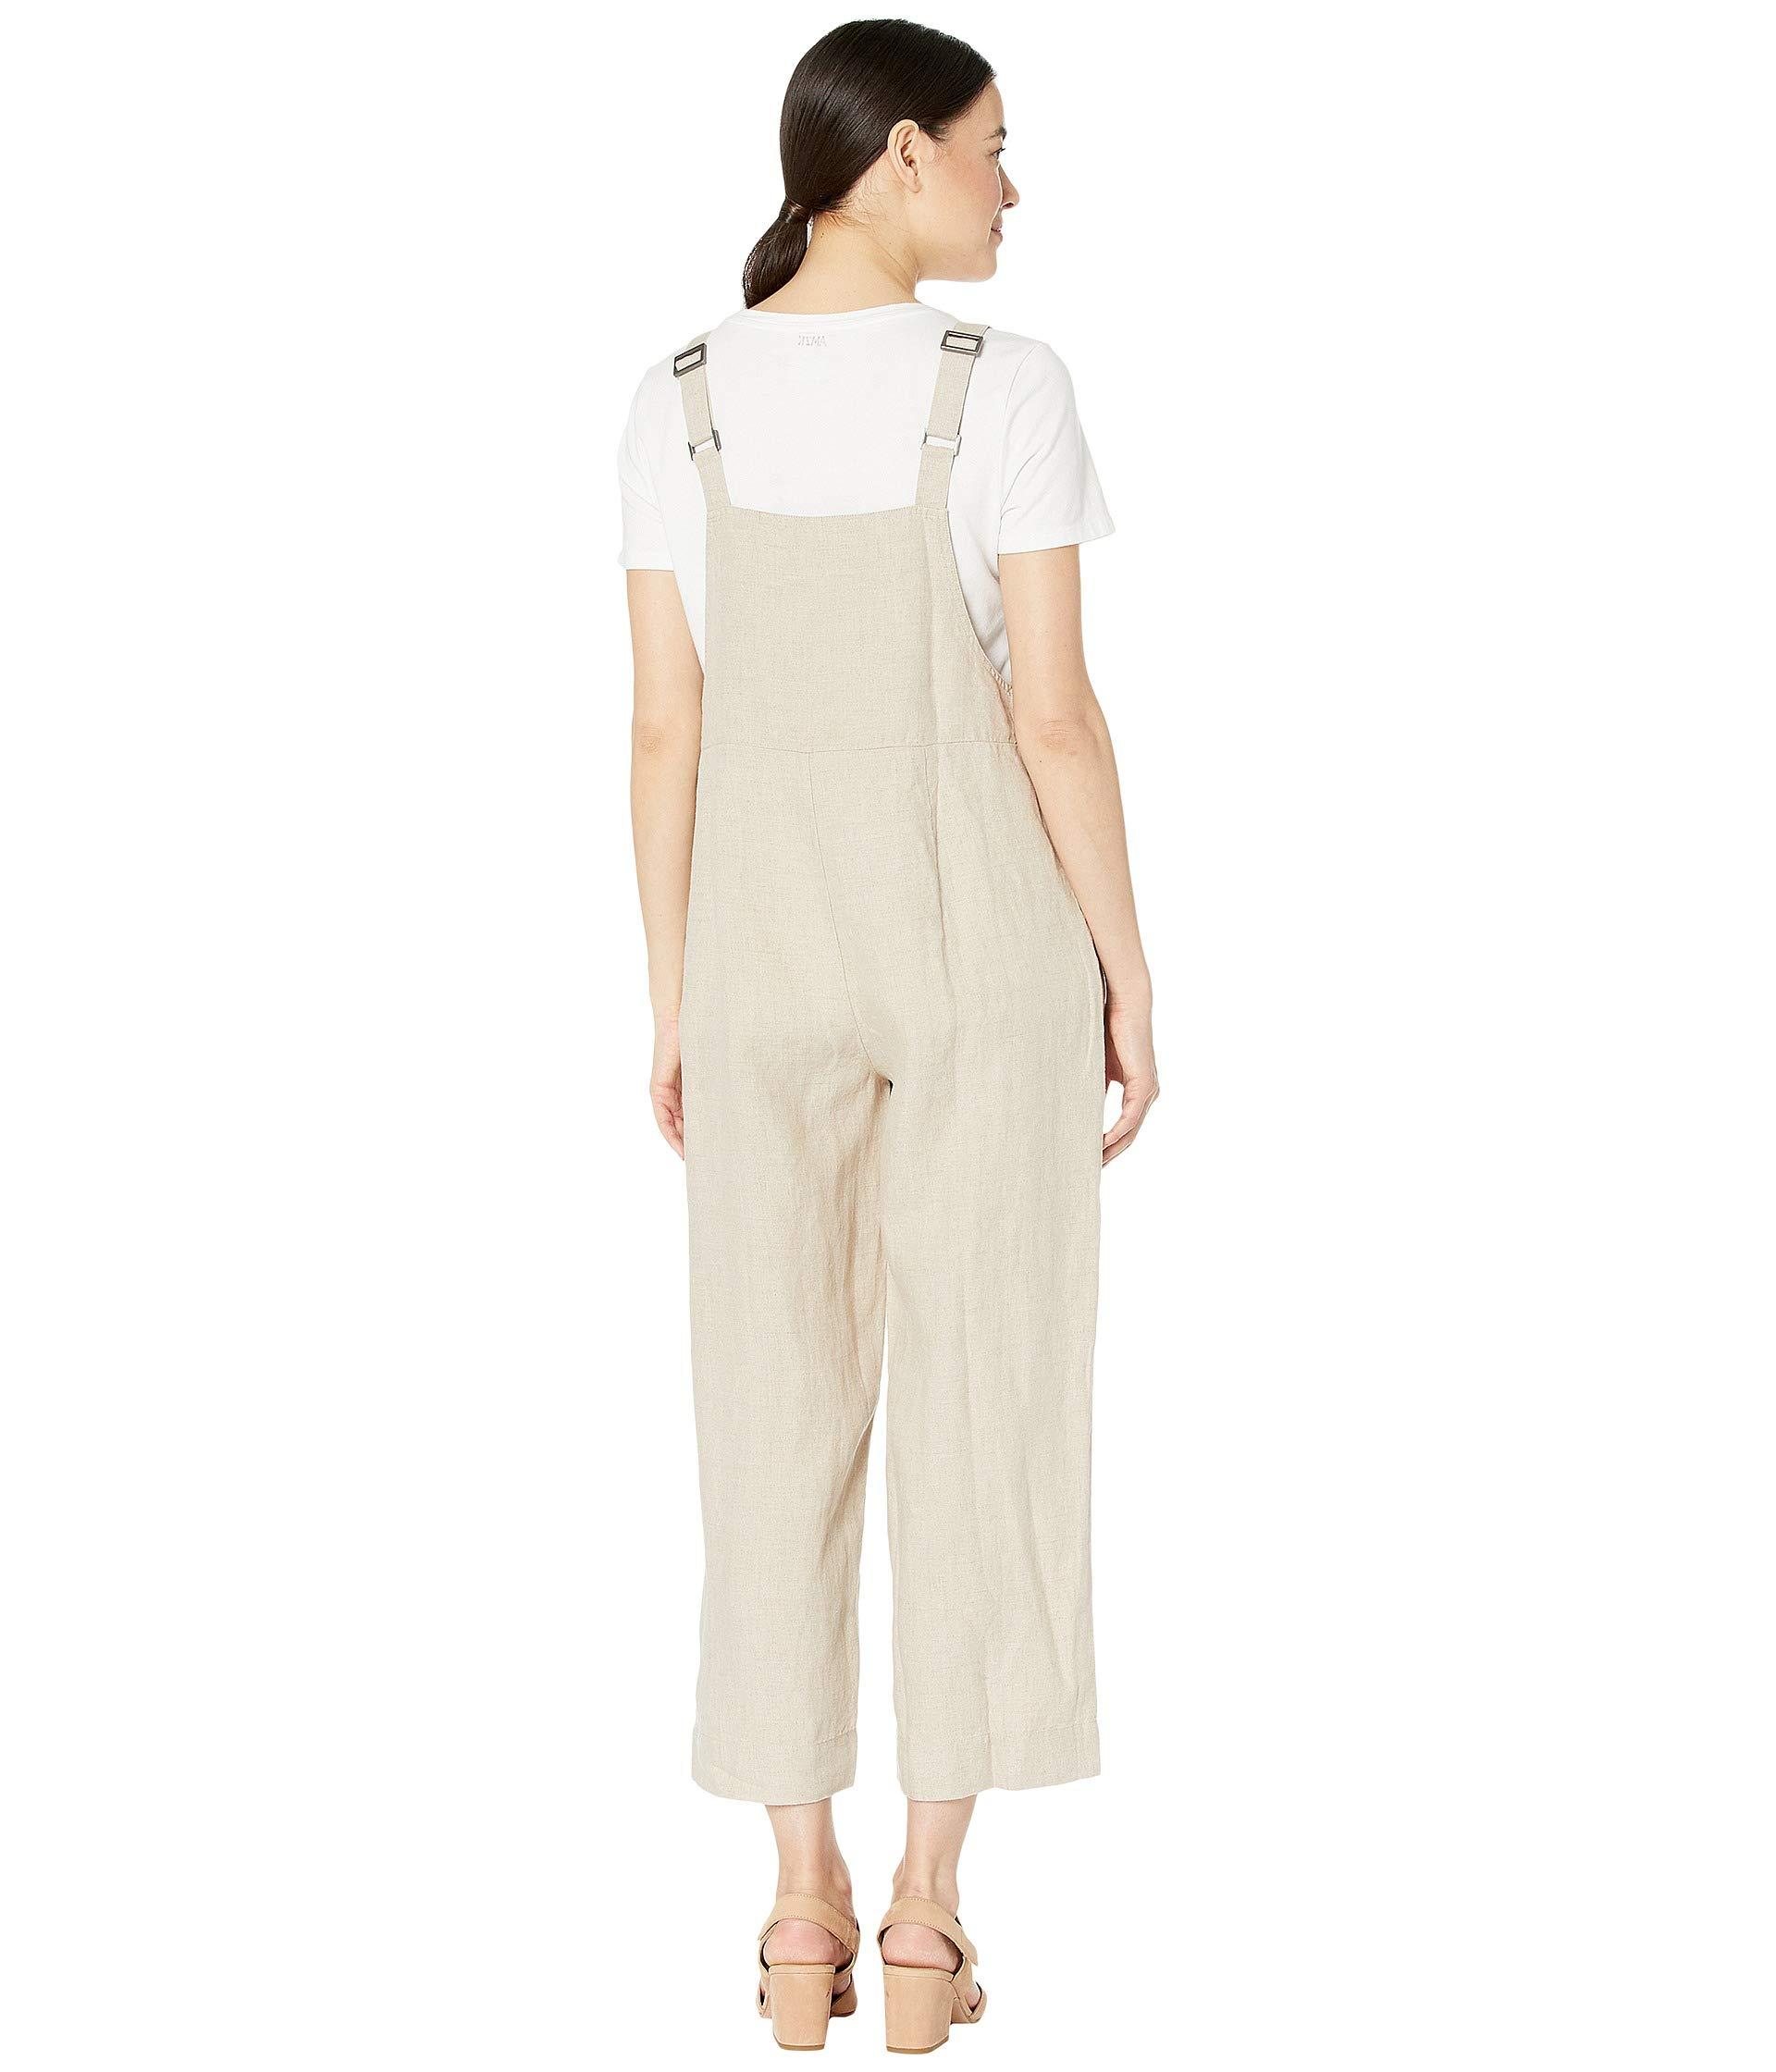 Eileen Fisher Petite Organic Linen Cropped Jumpsuit in White - Lyst